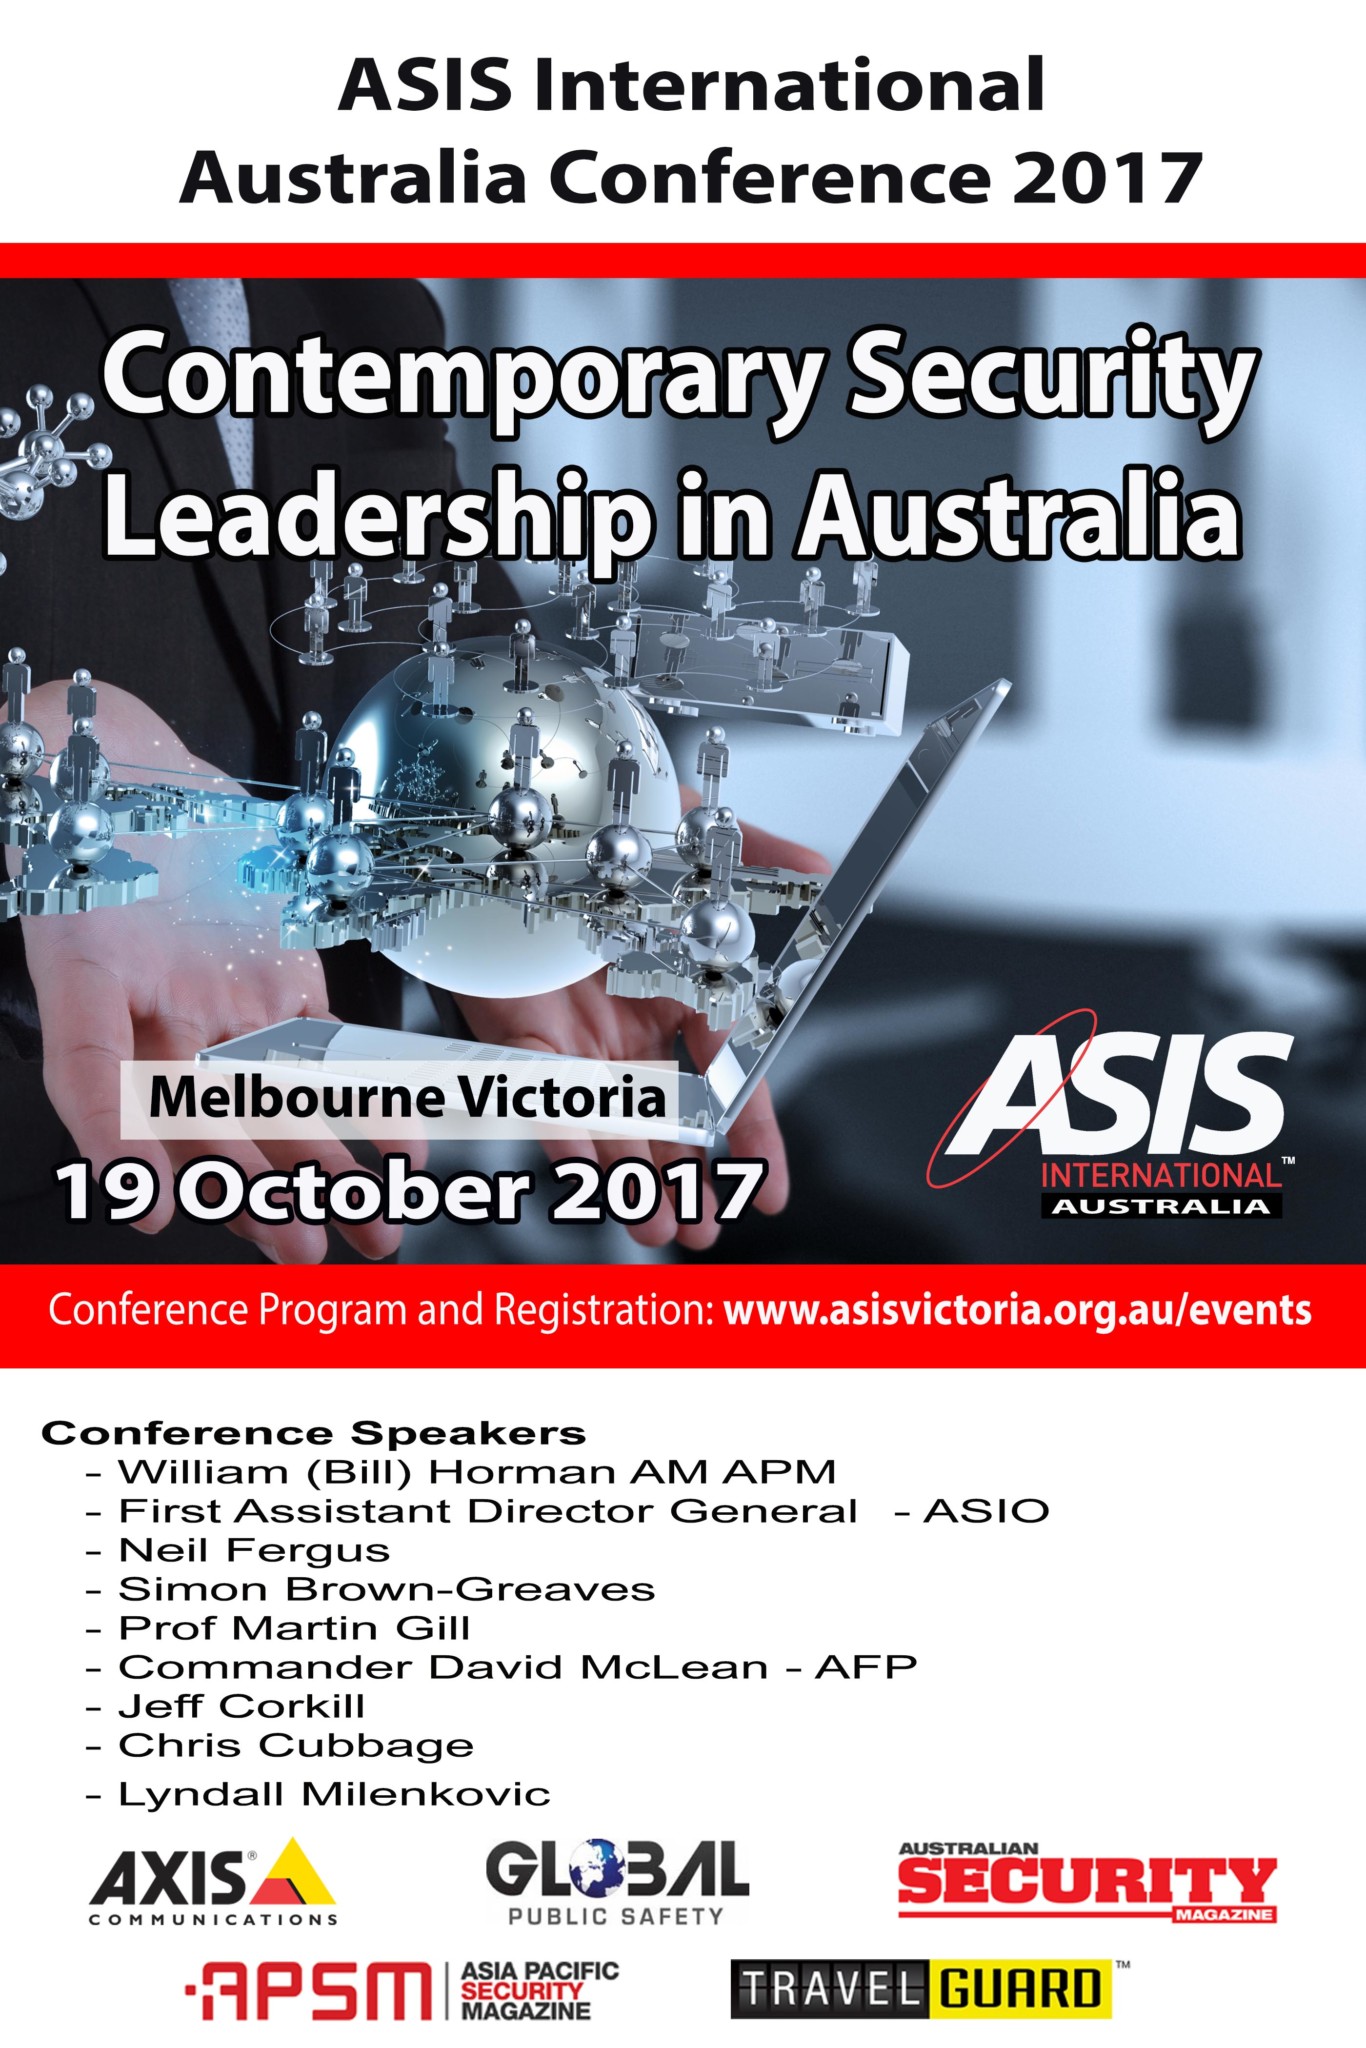 ASIO First Assistant Director General to address ASIS International